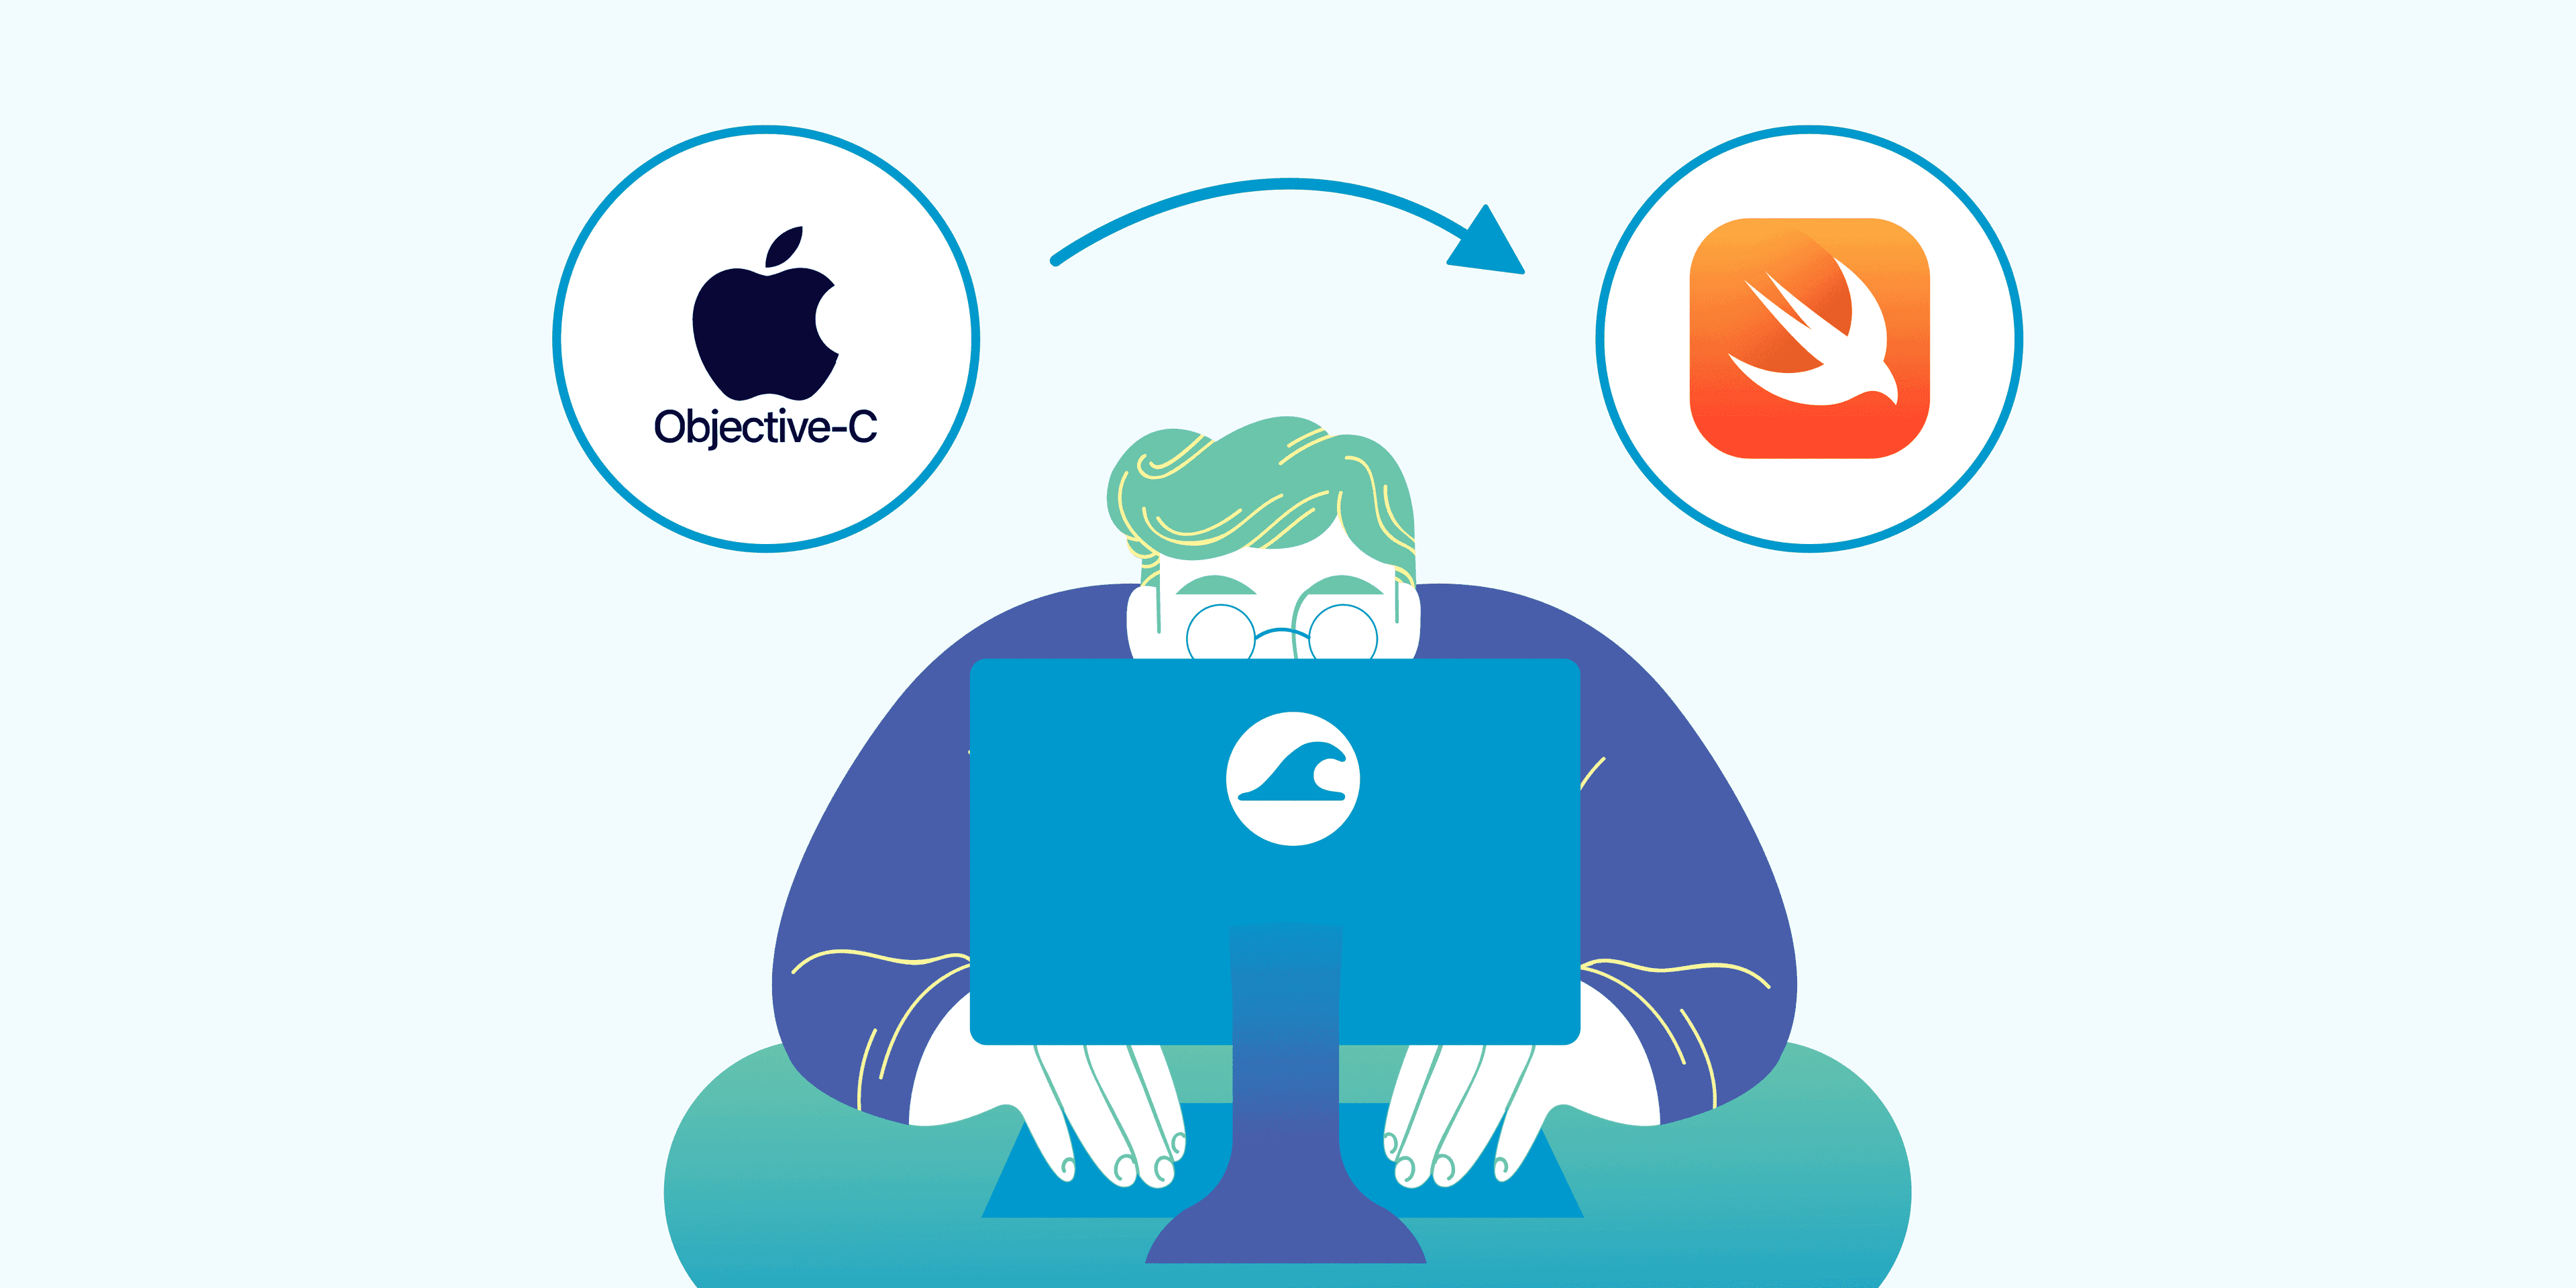 Tips for migrating your codebase from Objective-C to Swift